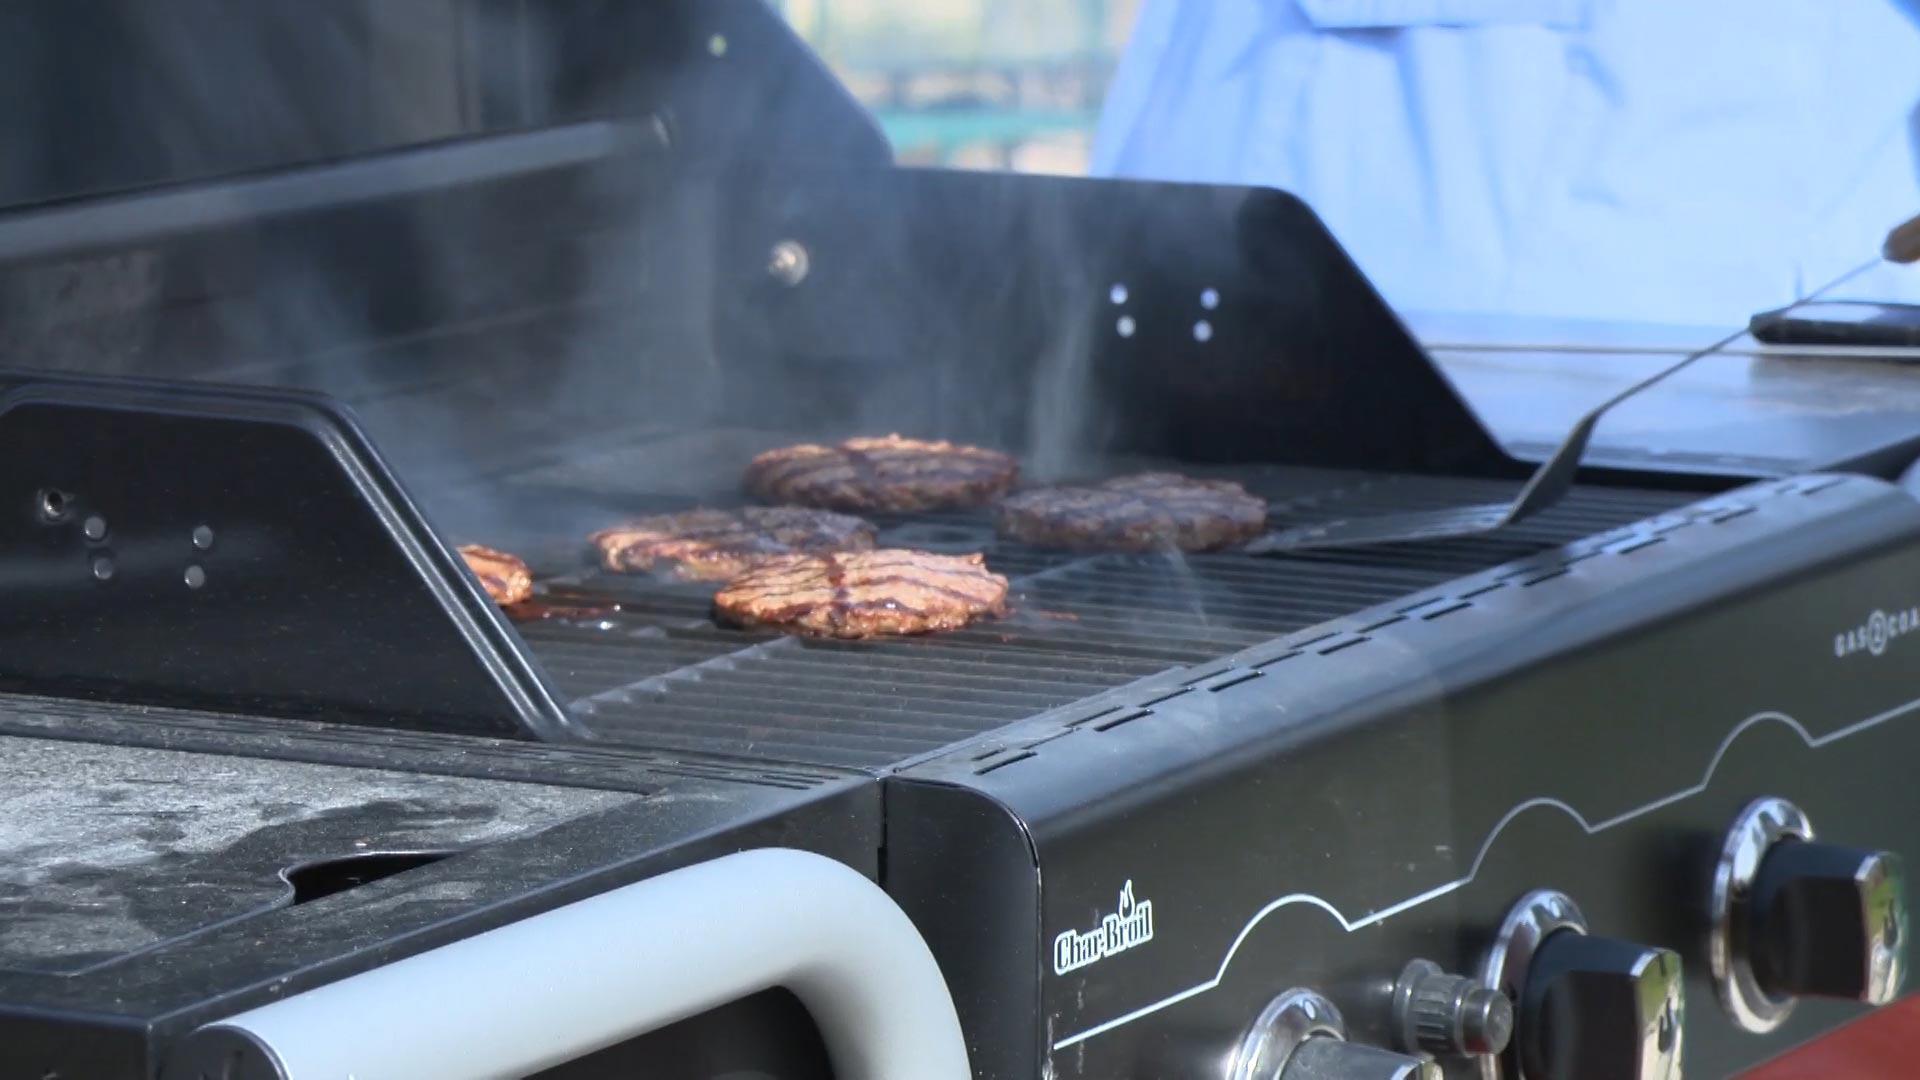 How to Grill Burgers on Charcoal and Gas Grills